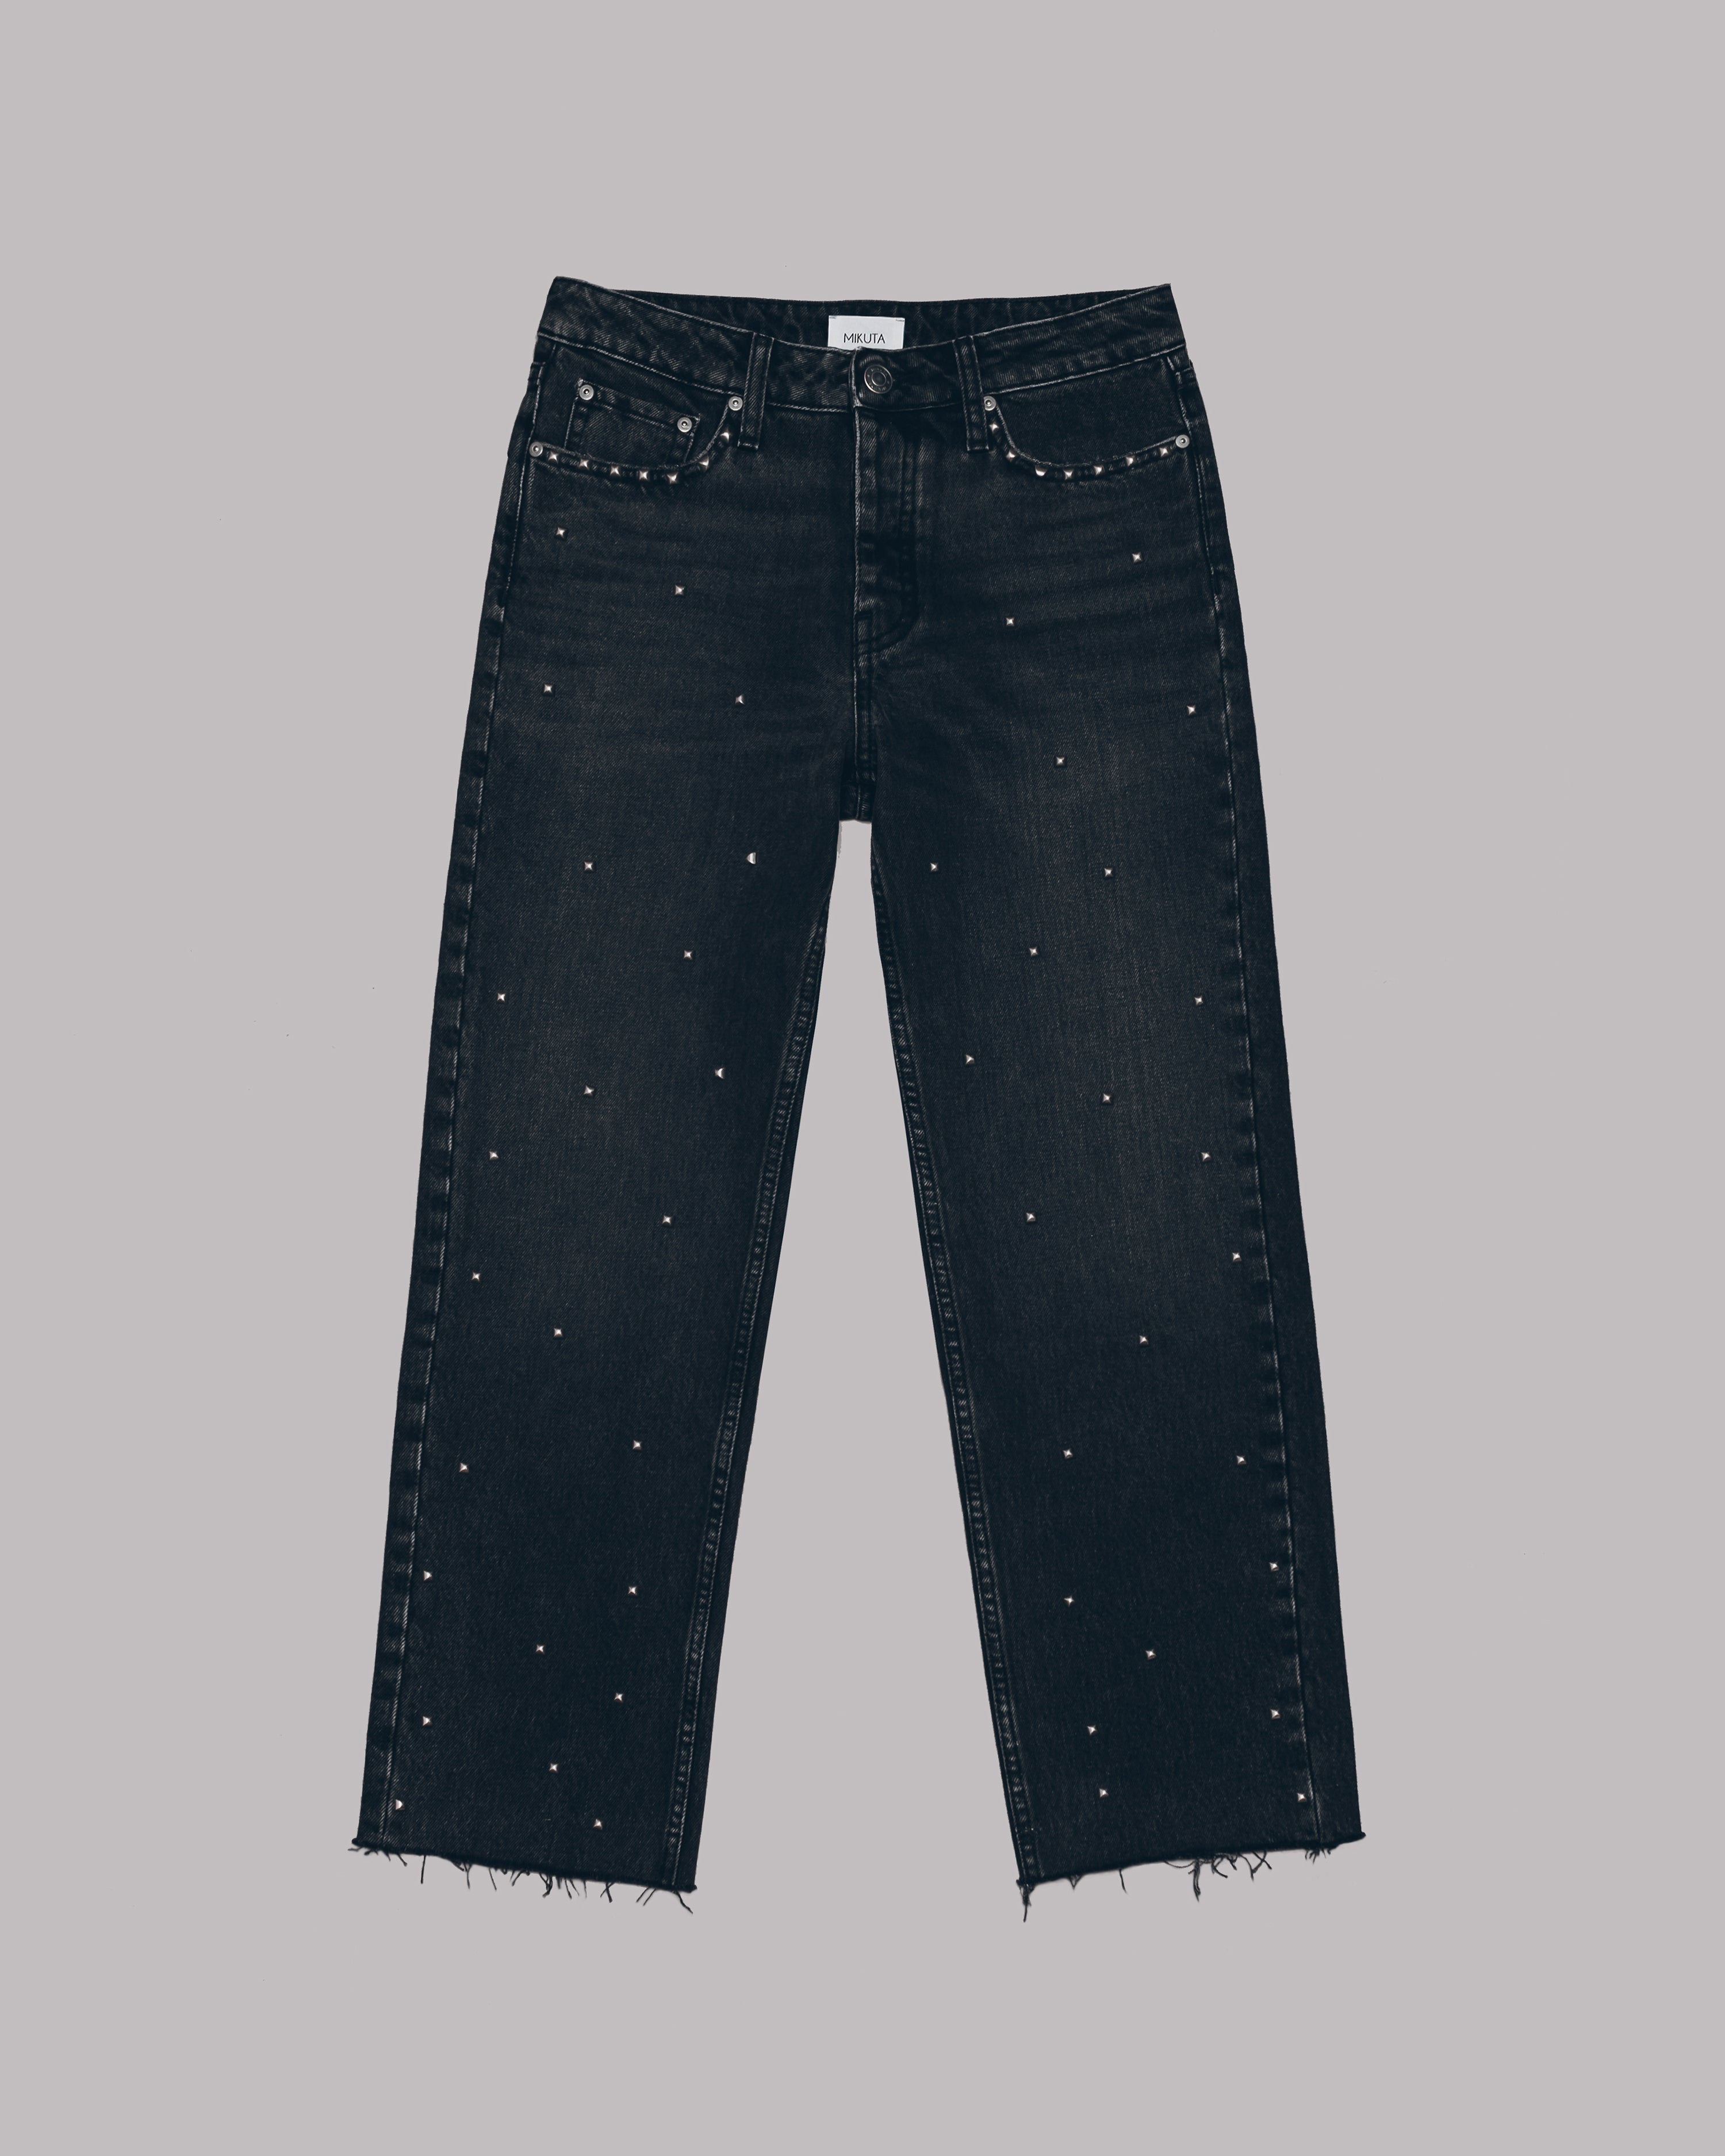 The Black Studded Cropped Straight Jeans